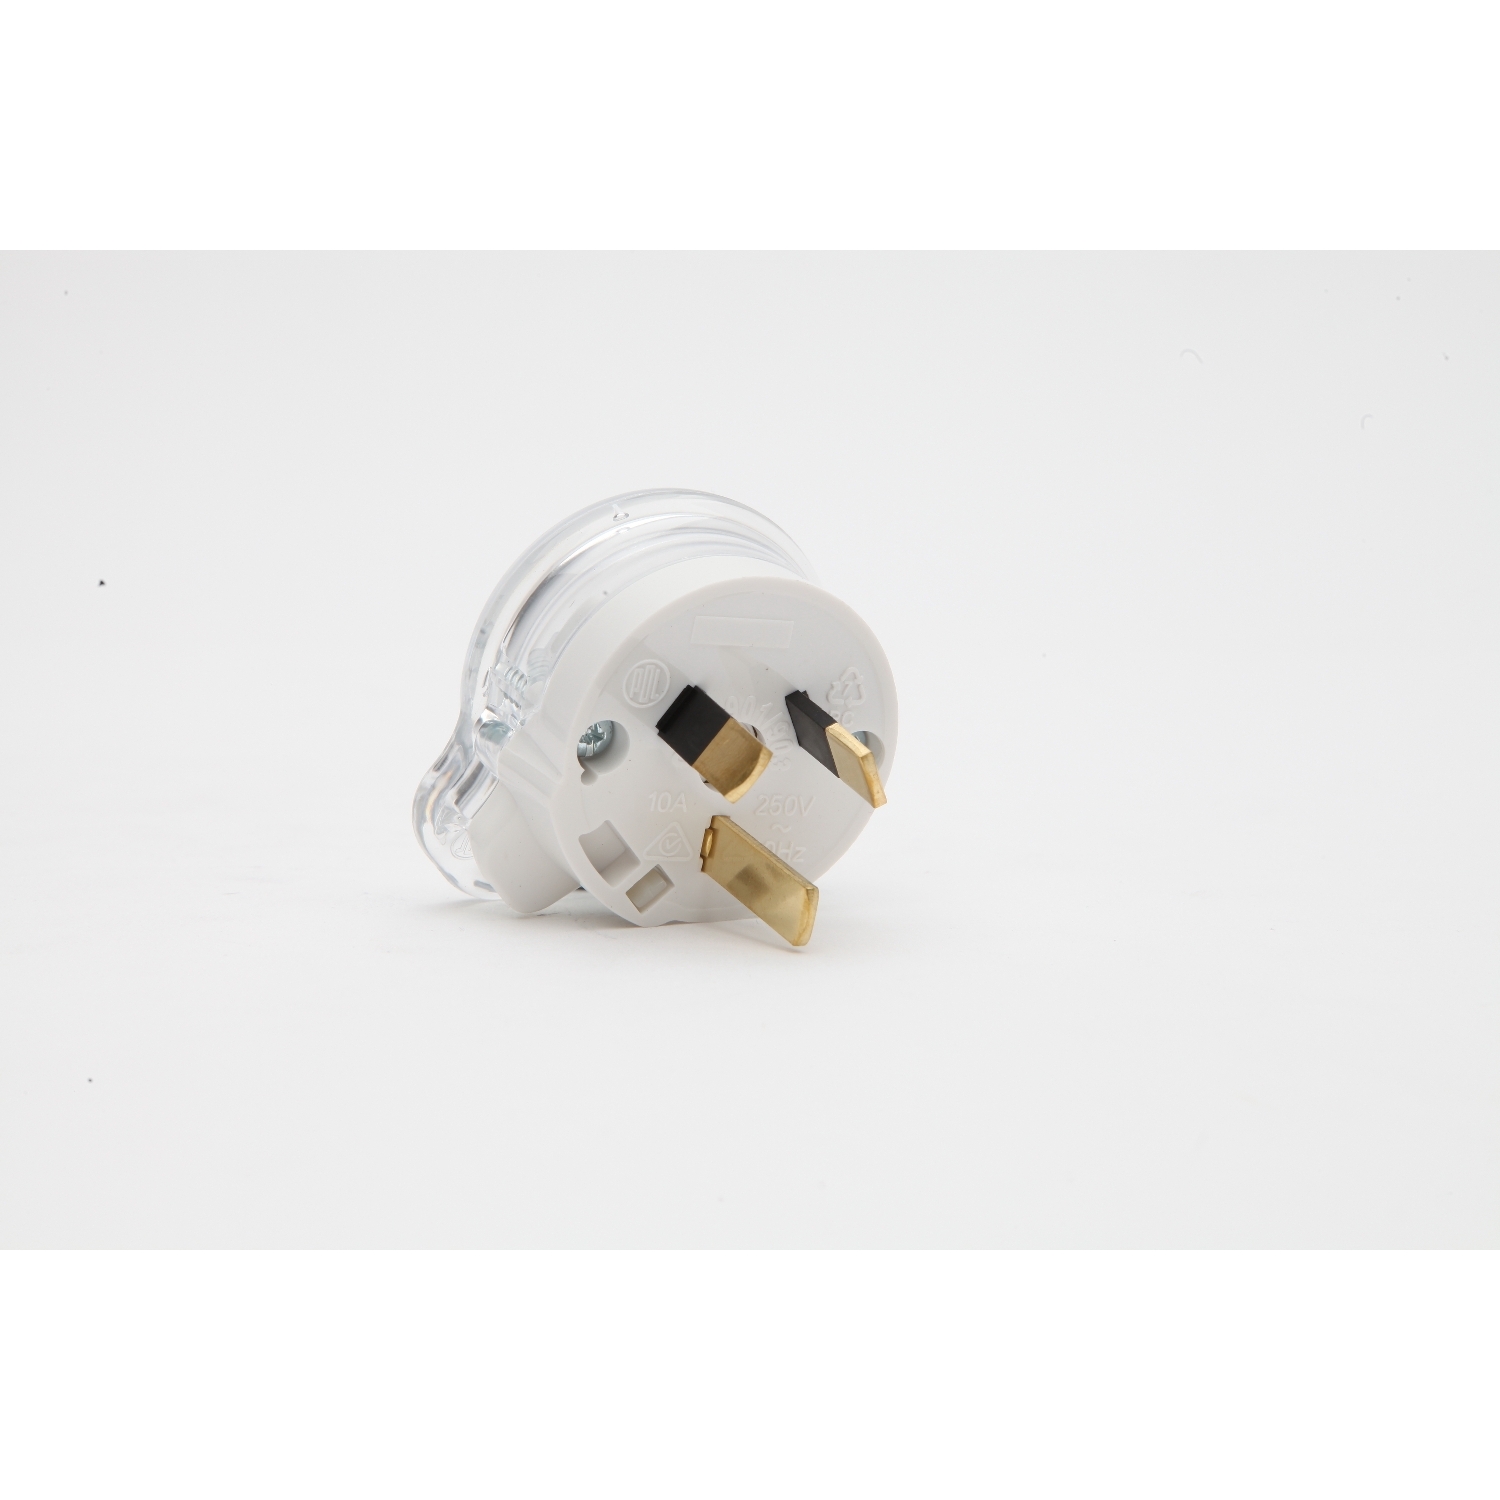 PDL 900 Series - Plug 10A Side-Entry 3-Pin Rewirable - Transparant